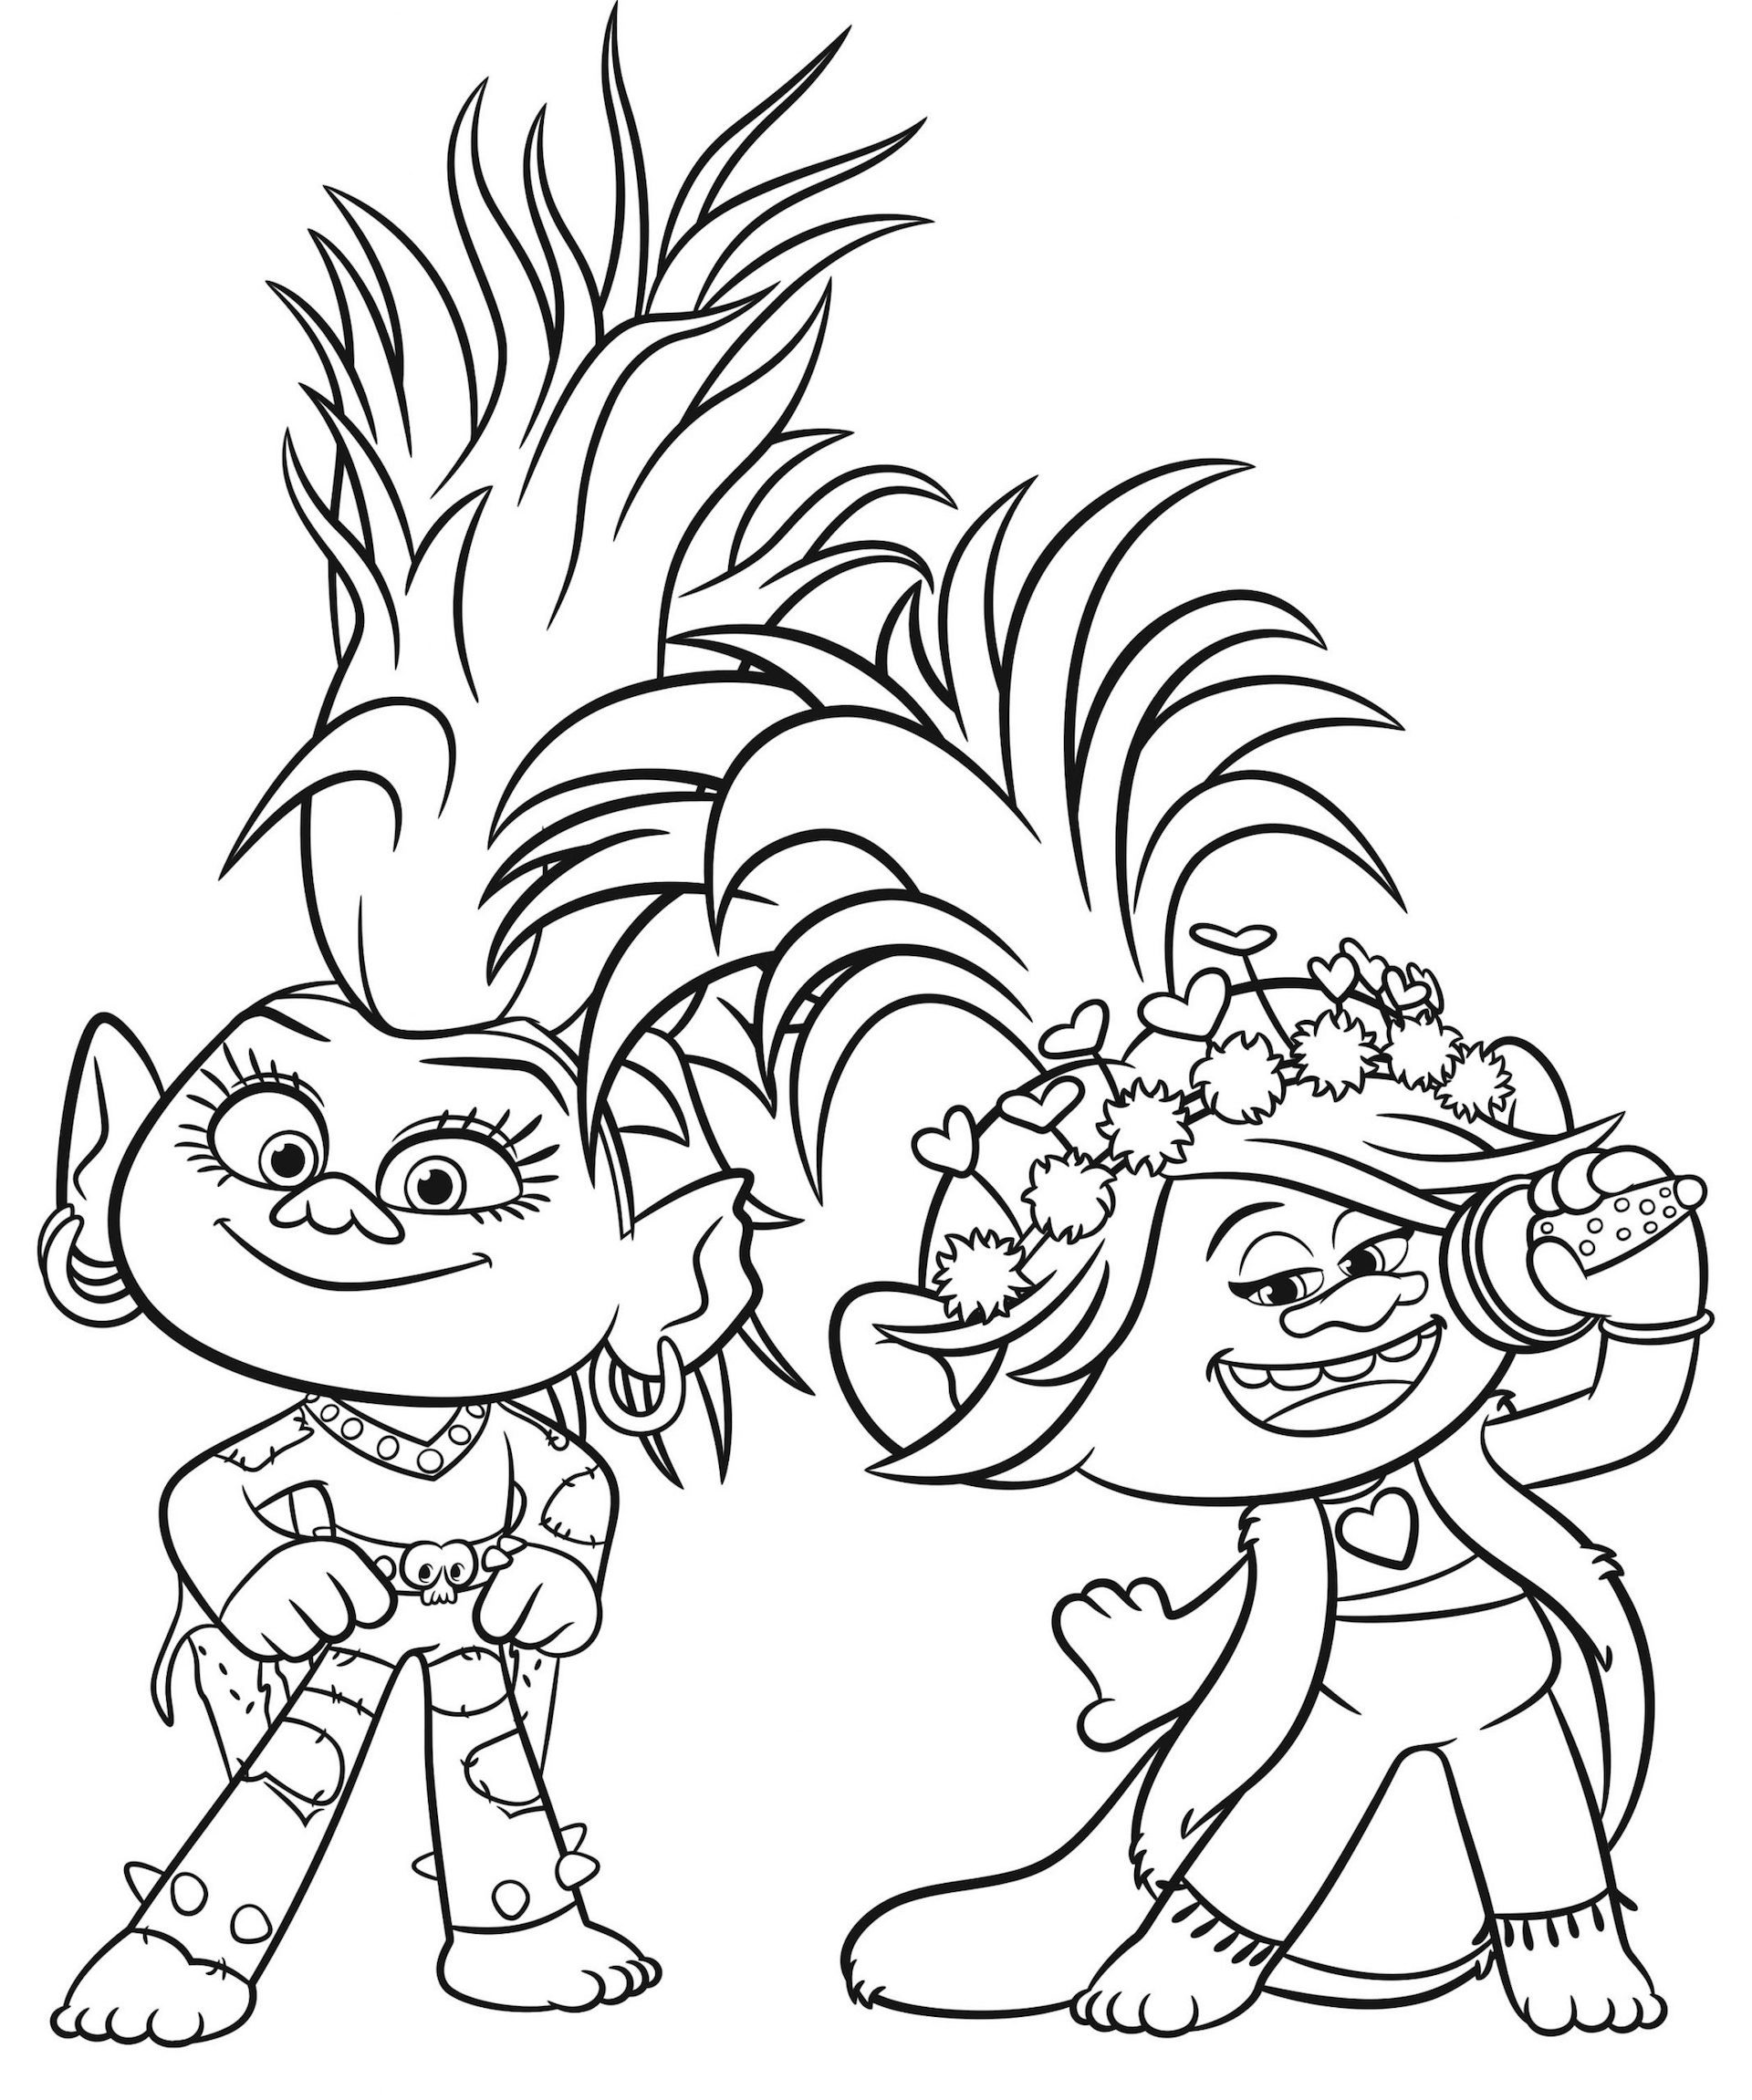 trolls-printable-coloring-pages